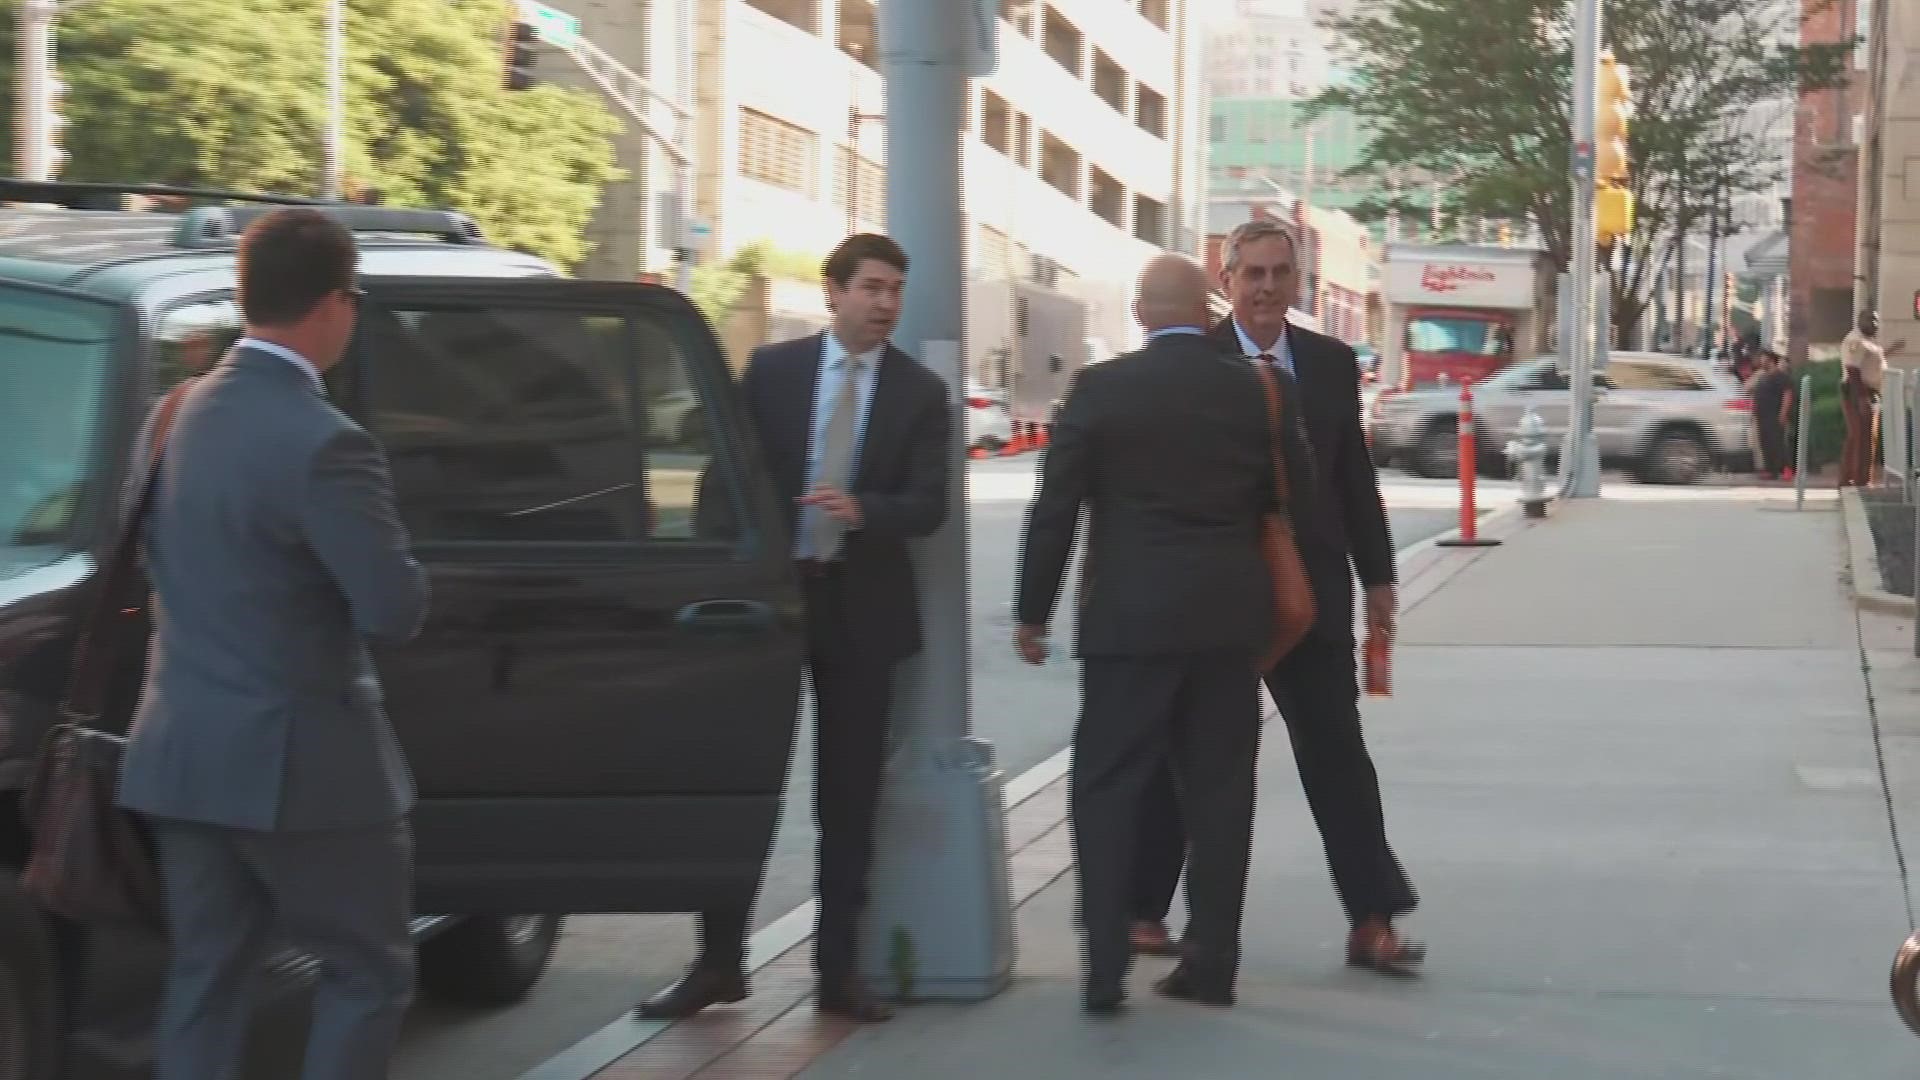 In the last few hours, Secretary of State Brad Raffensperger left the Fulton County courthouse after testifying before a Special Grand Jury.